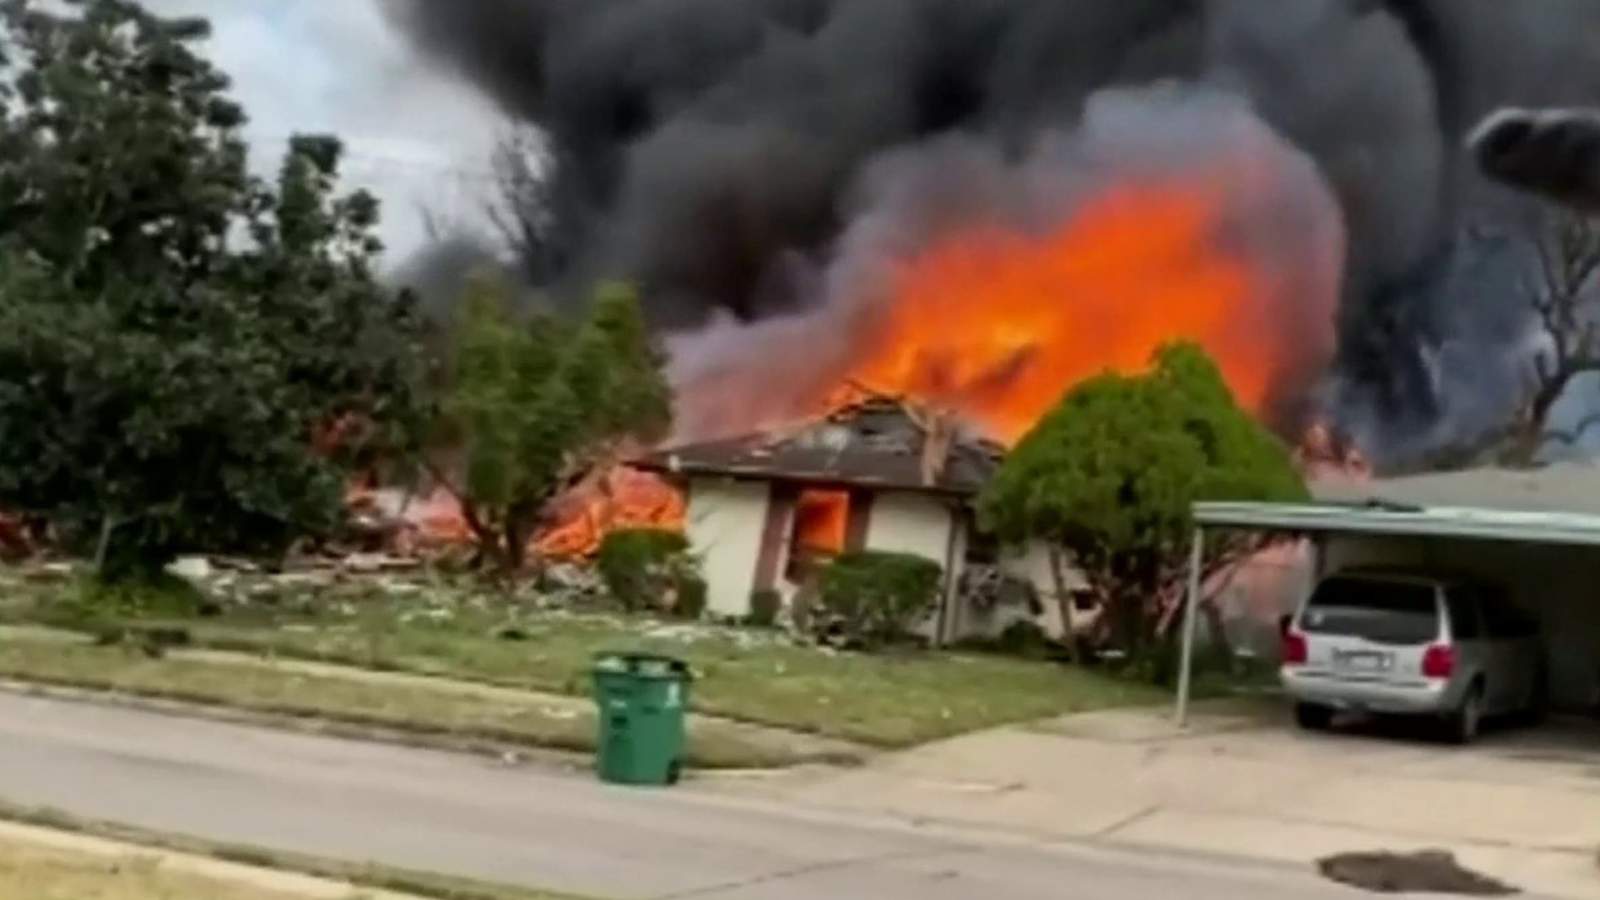 WATCH: Massive fire caused by explosion engulfs home, damages multiple others